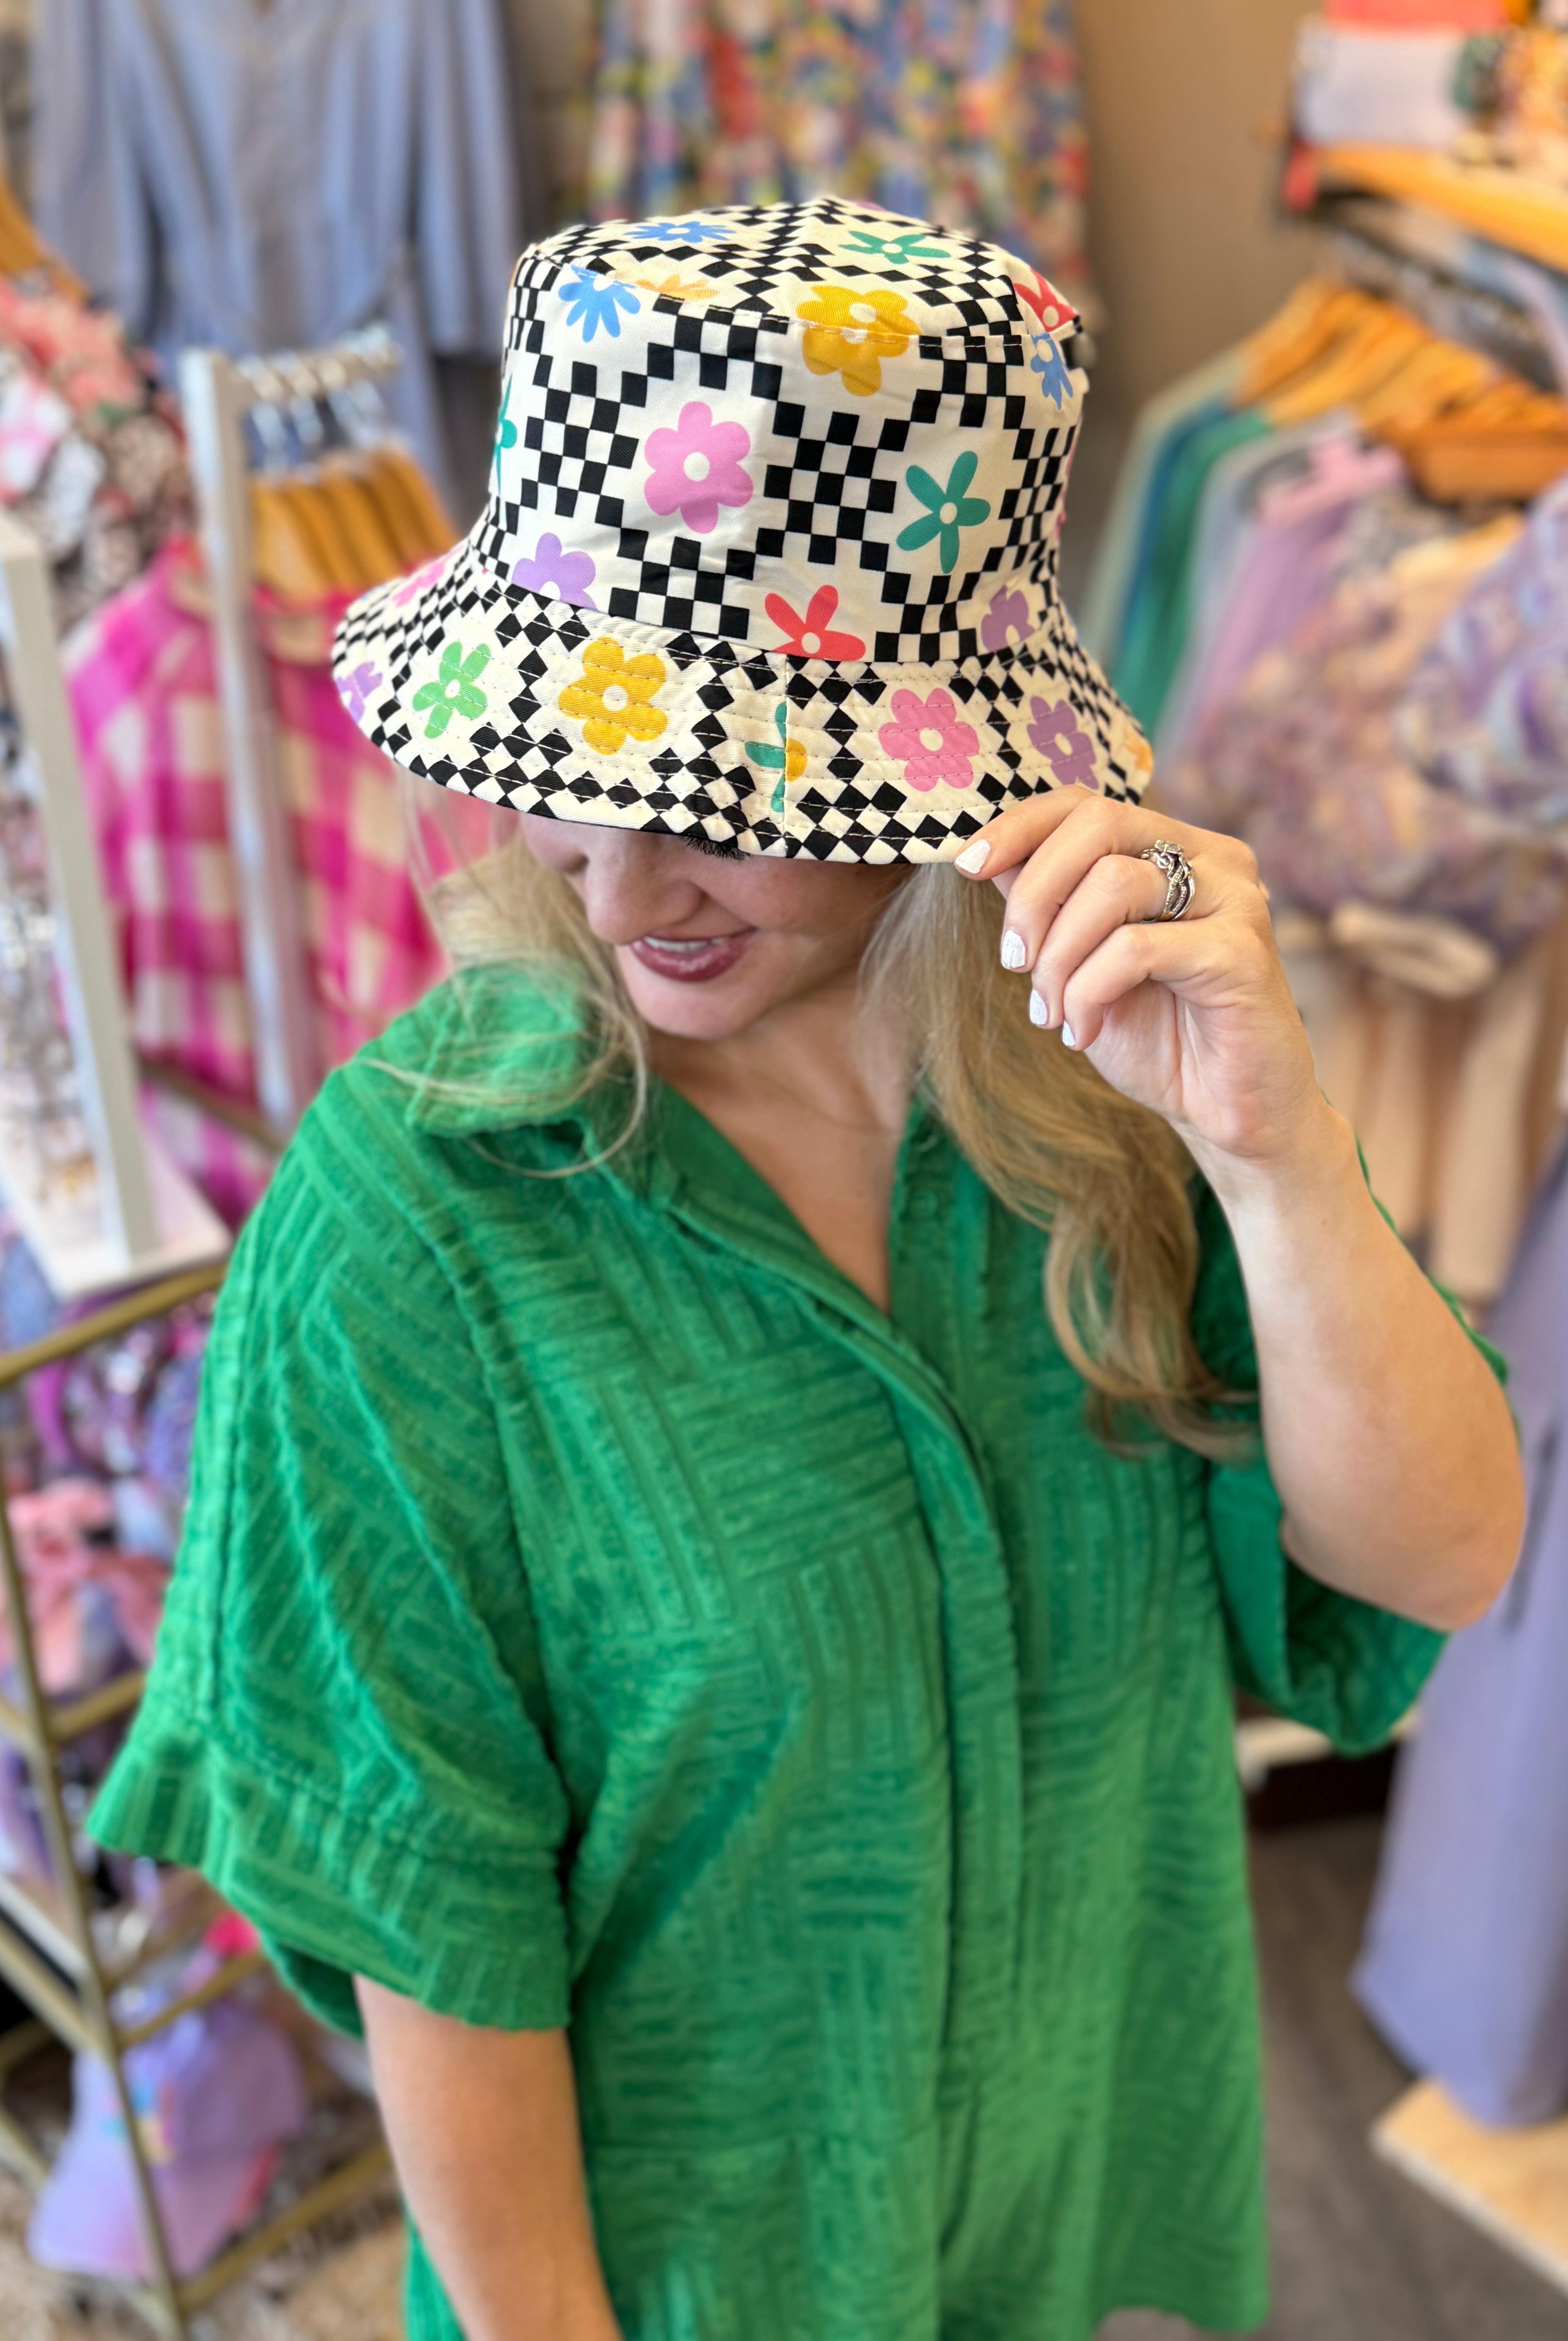 Retro Print Bucket Hat-The Lovely Closet-The Lovely Closet, Women's Fashion Boutique in Alexandria, KY